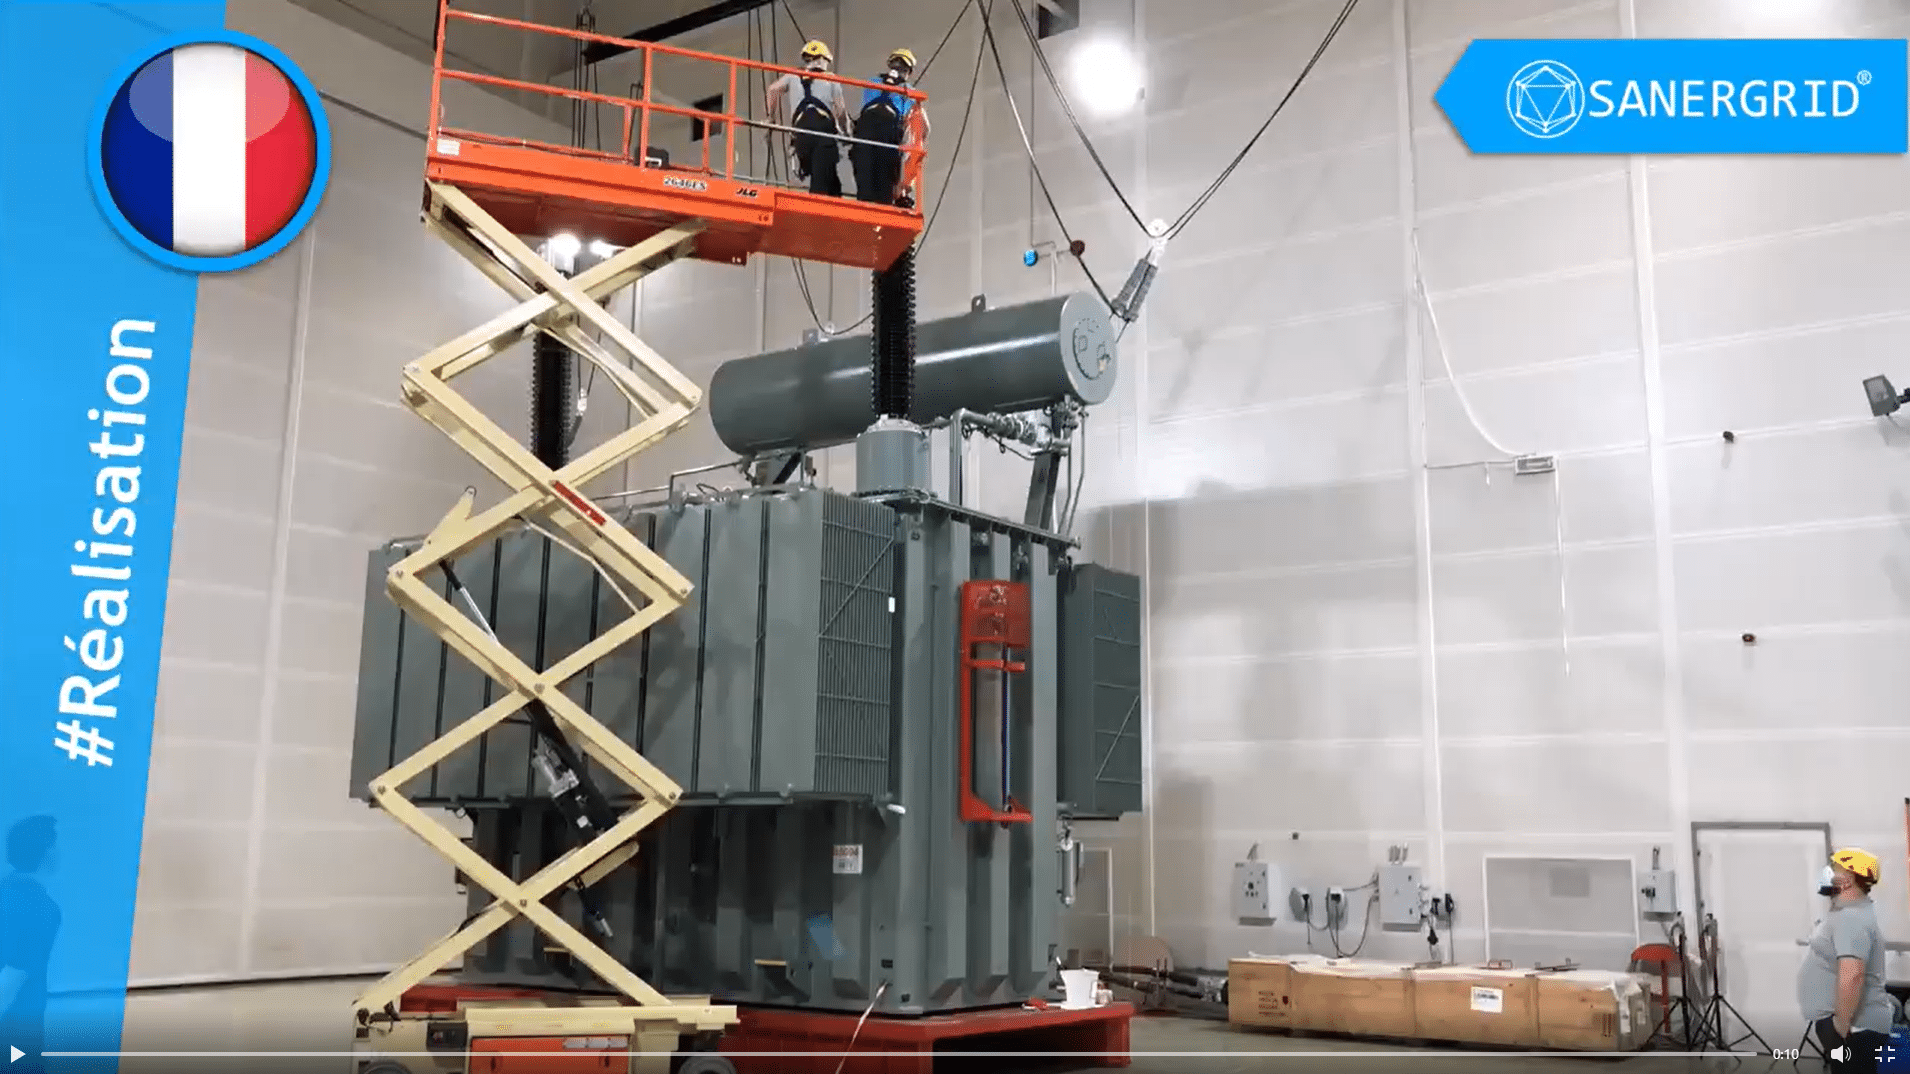 SONEC SANERGRID factory takes delivery of a Kolektor ETRA rail traction oil-filled electrical transformer